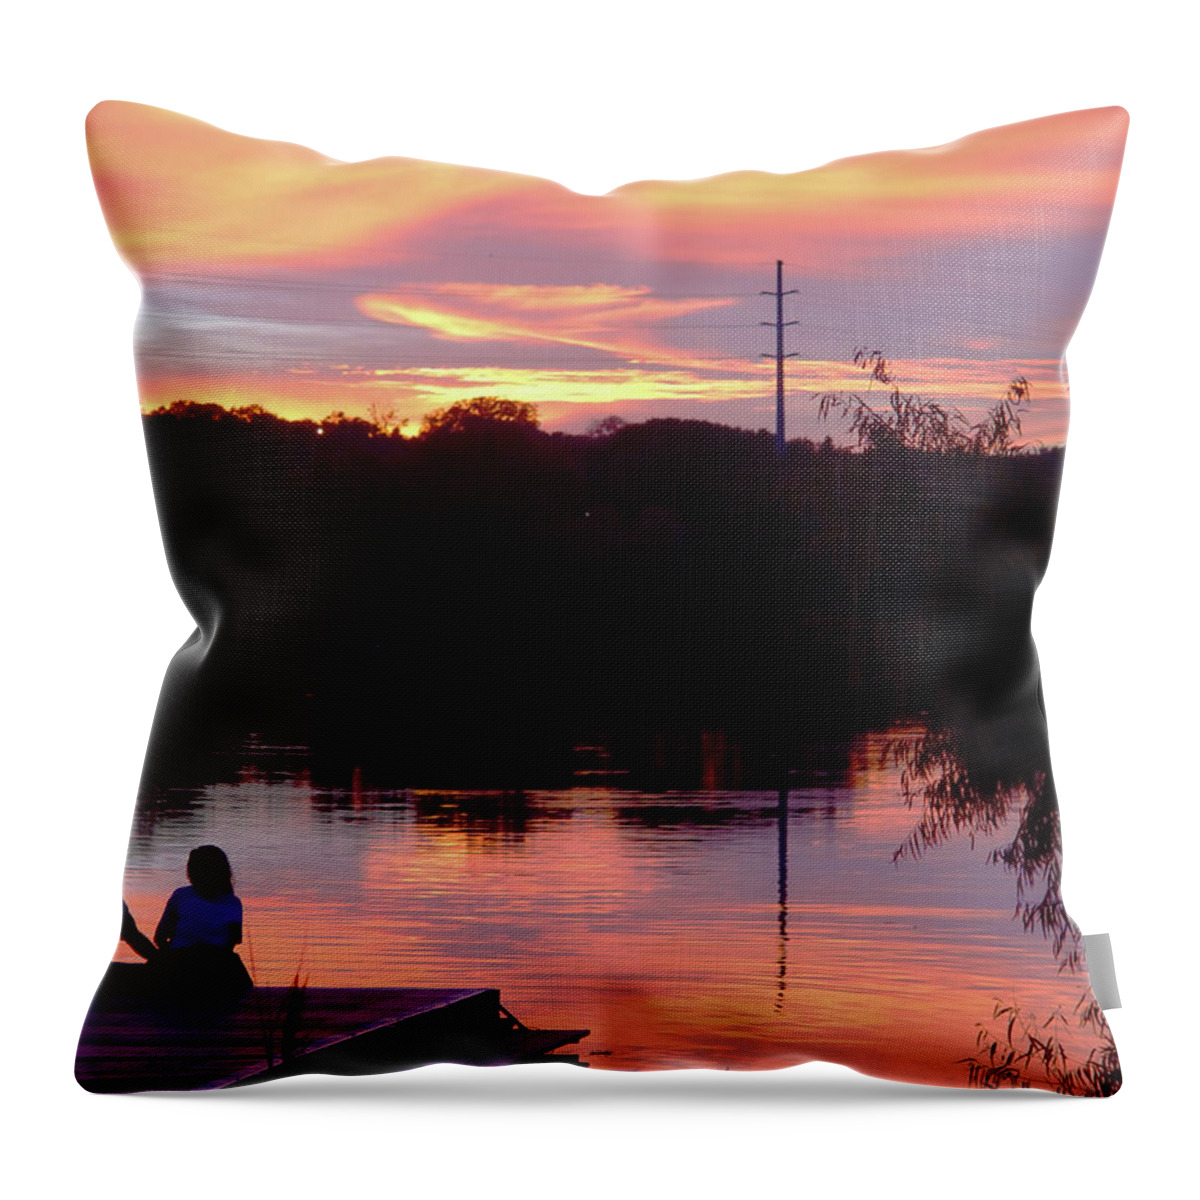 Heterosexual Couple Throw Pillow featuring the photograph Couple And A Sunset by Tomwald